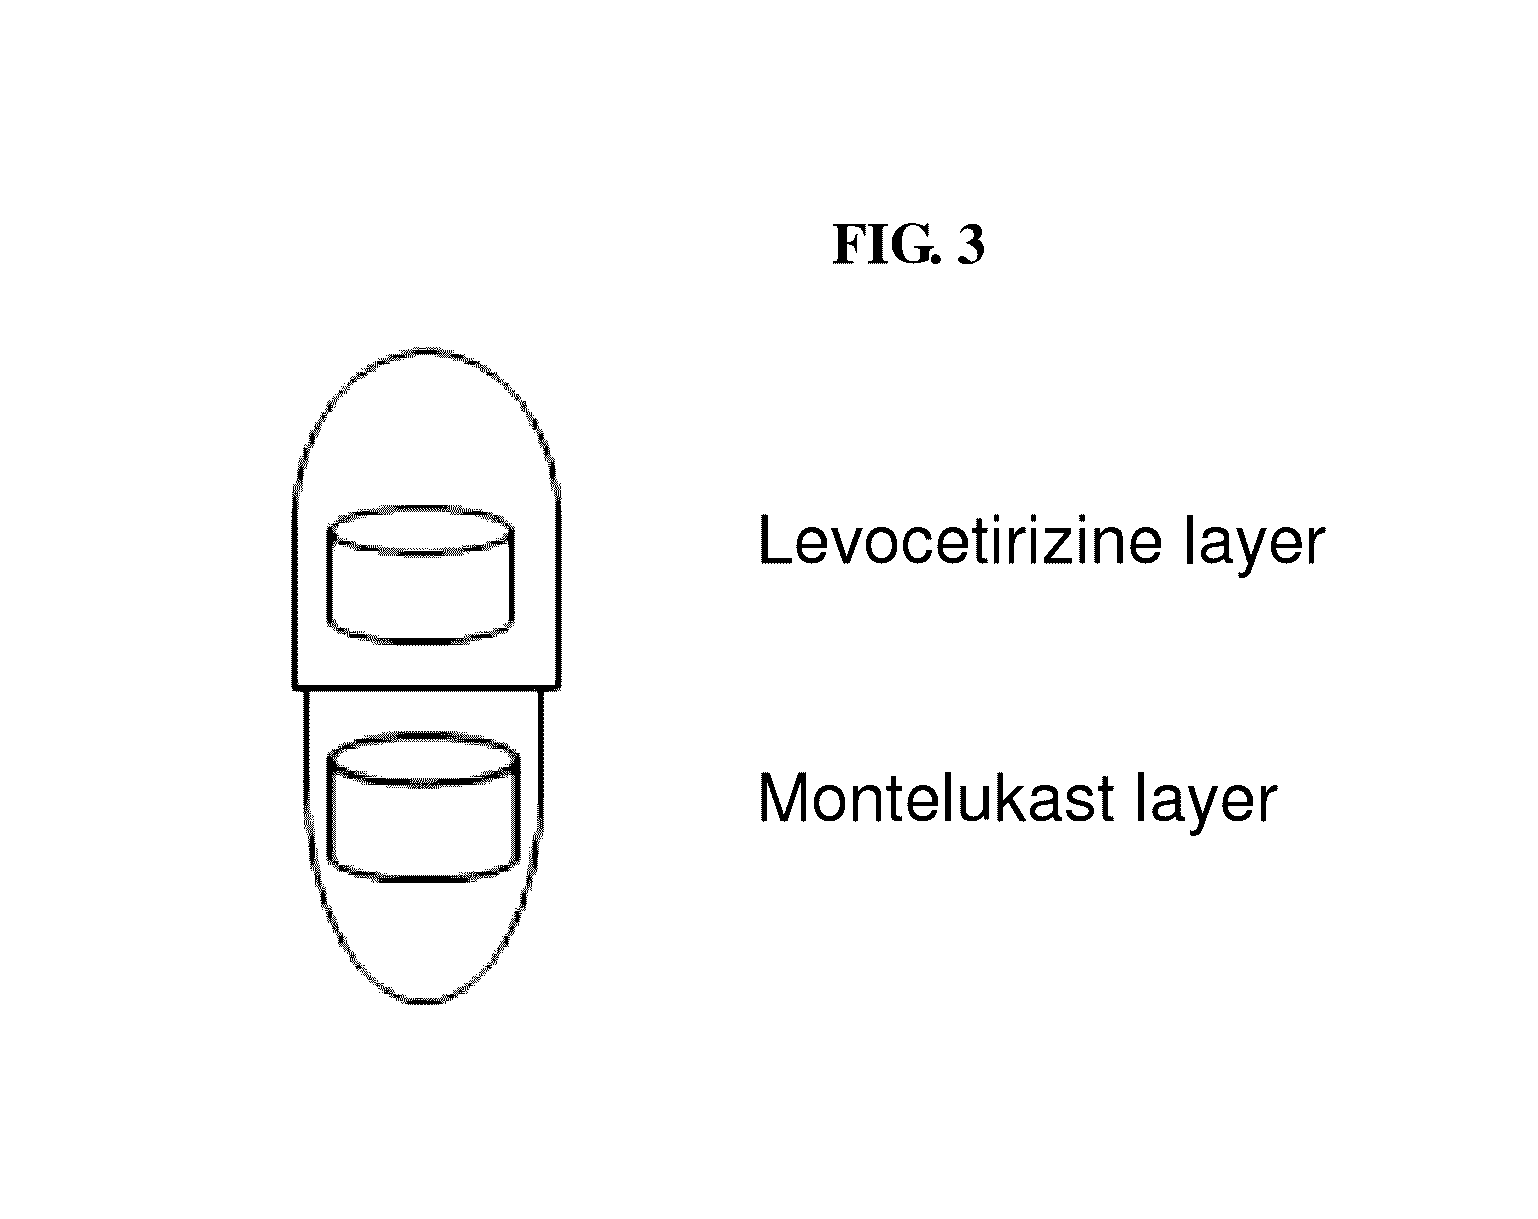 Stable pharmaceutical formulation for oral administration comprising levocetirizine or a pharmaceutically acceptable salt thereof, and montelukast or a pharmaceutically acceptable salt thereof